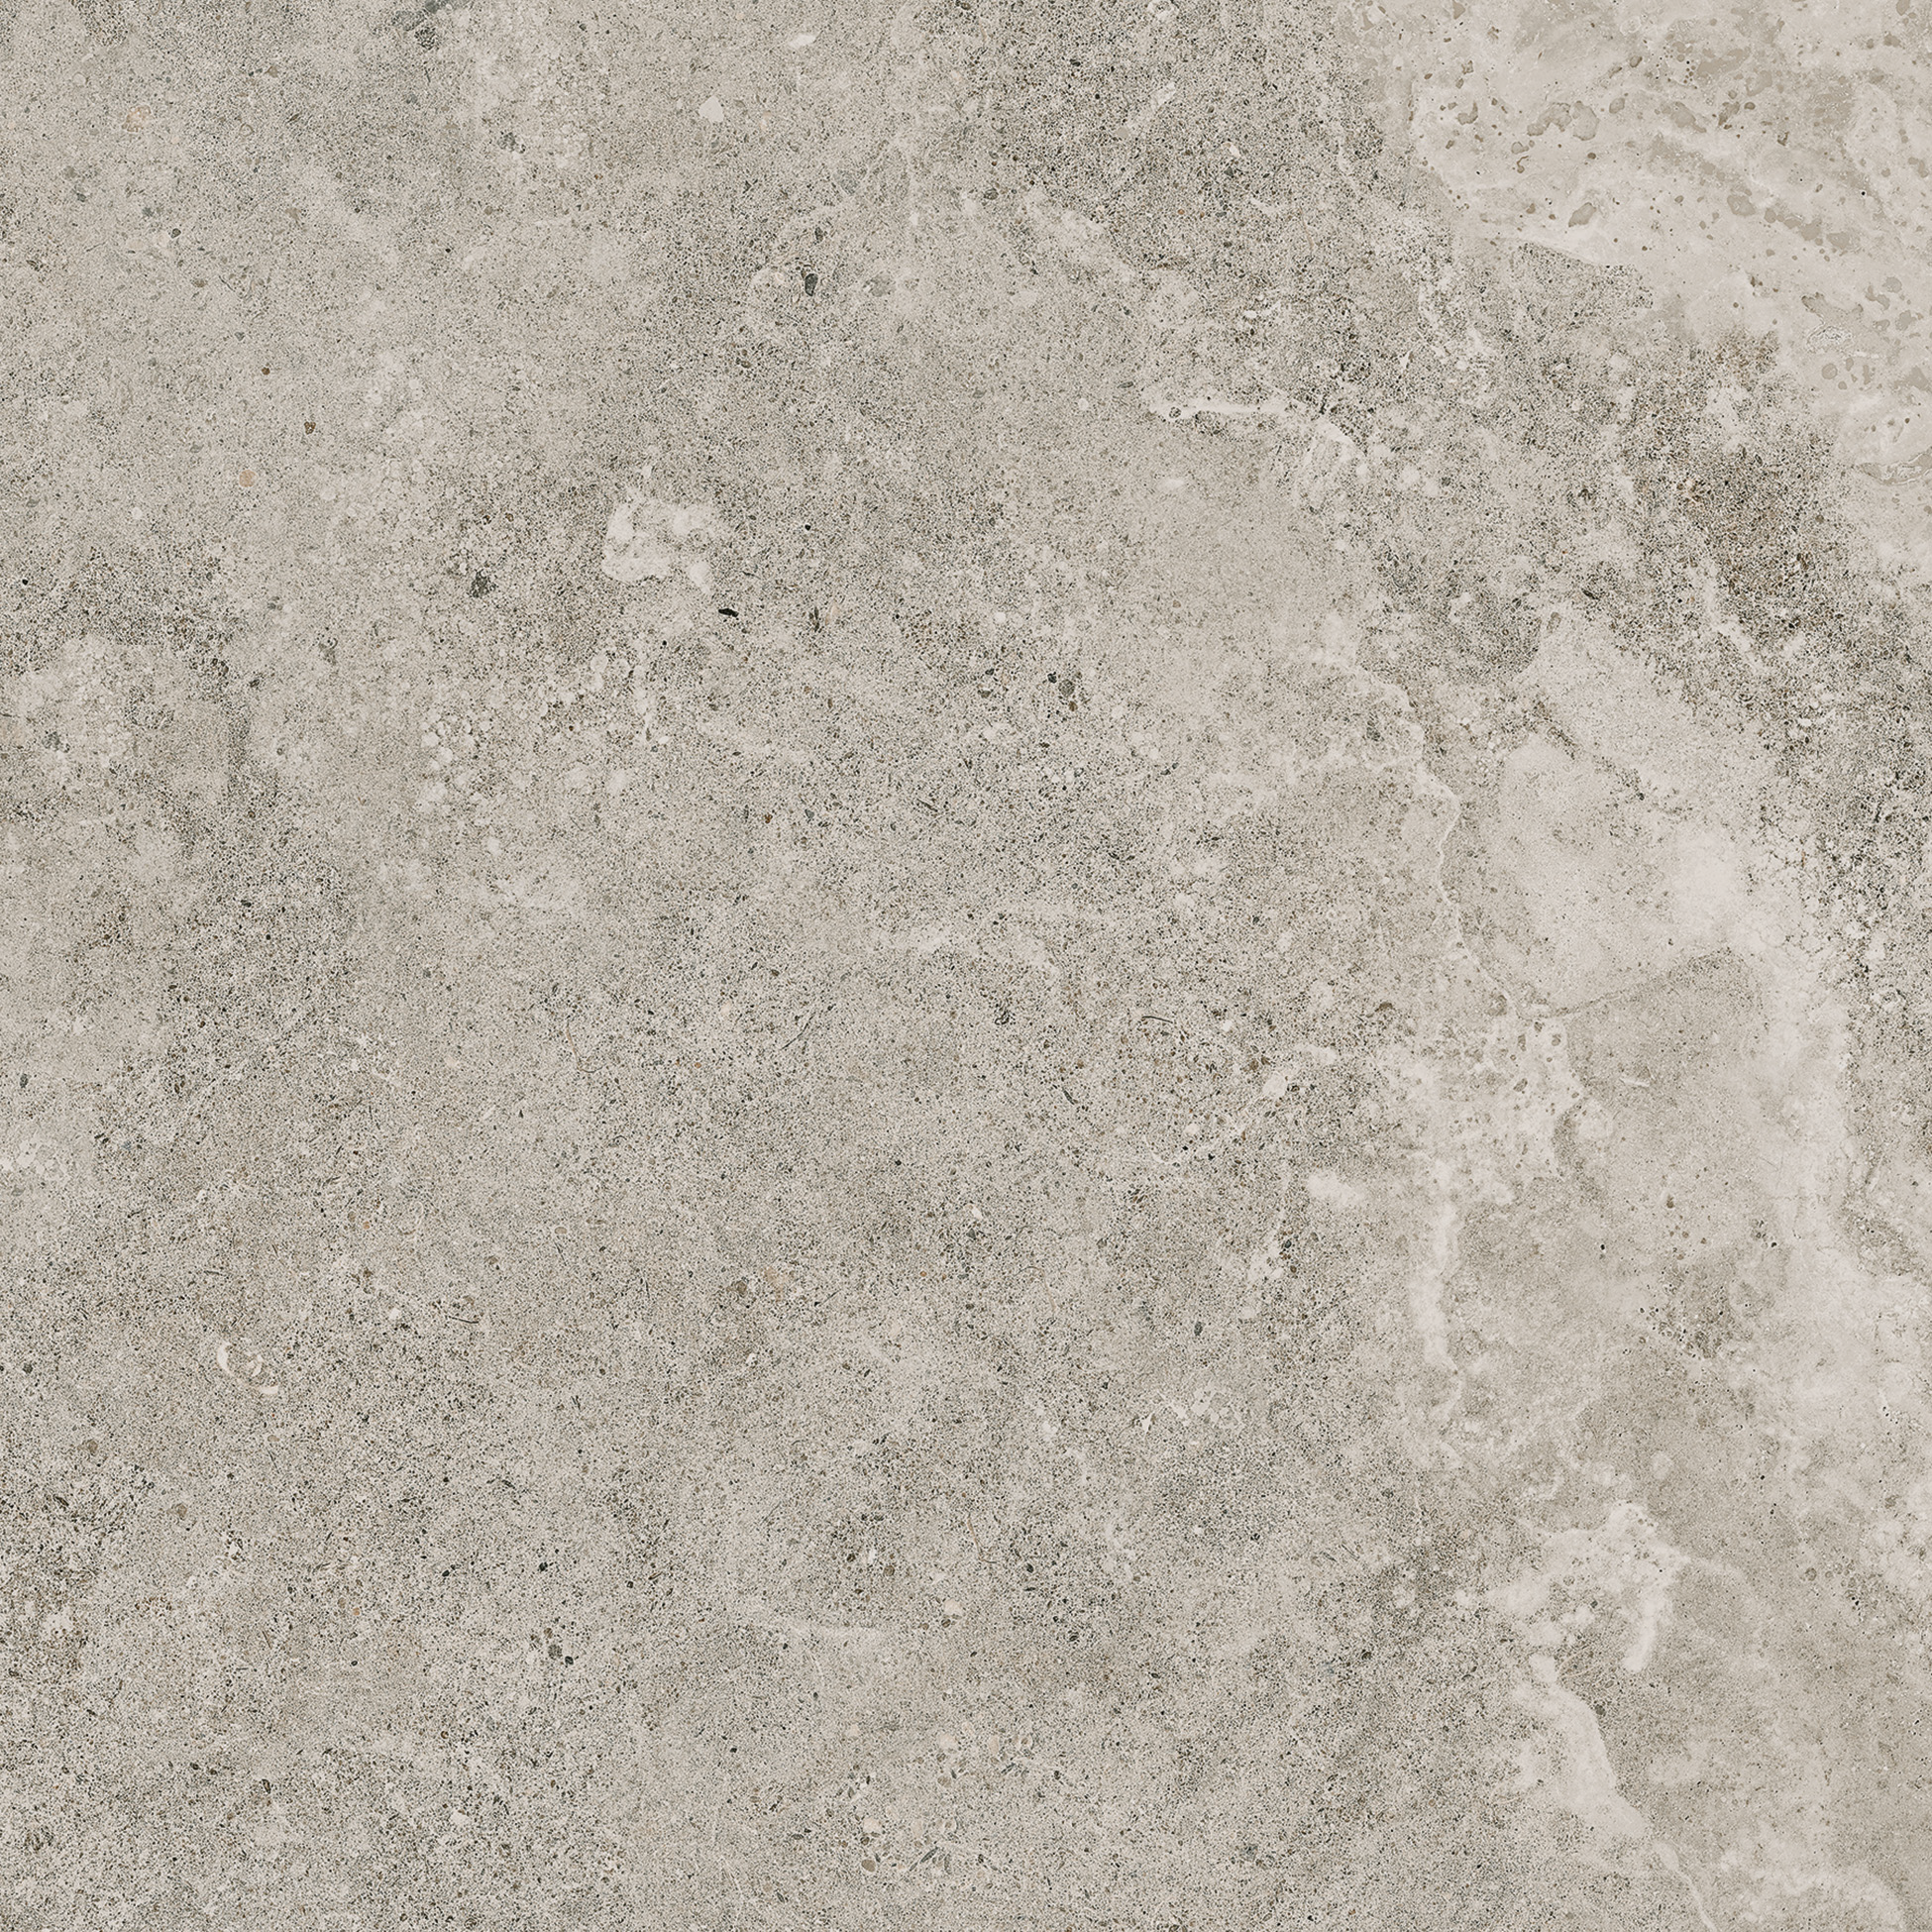 stormio pattern glazed porcelain field tile from veneta anatolia collection distributed by surface group international matte finish pressed edge 13x13 square shape